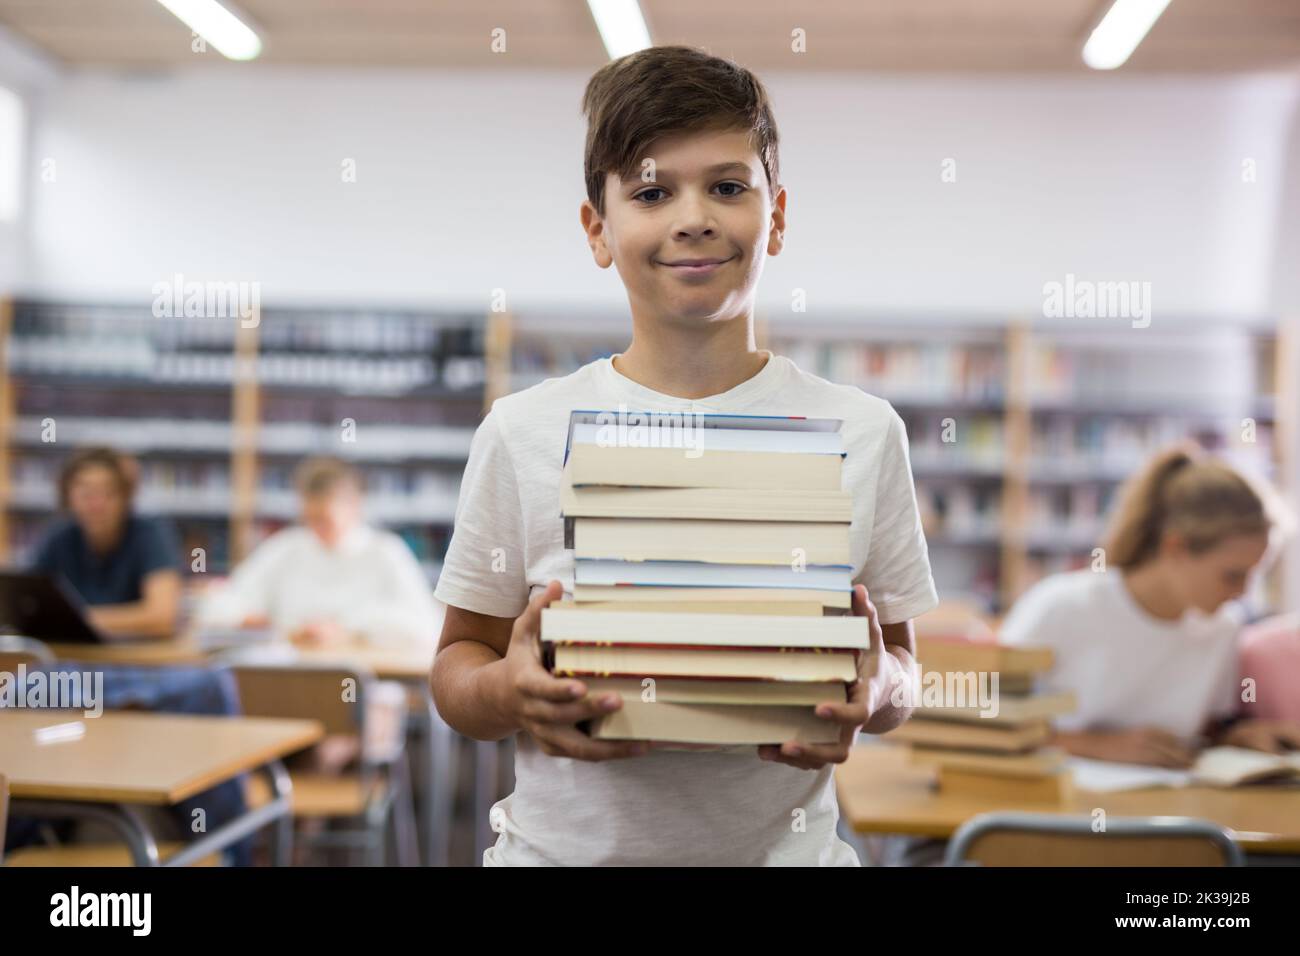 Teenager boy standing with a stack of books in library Stock Photo